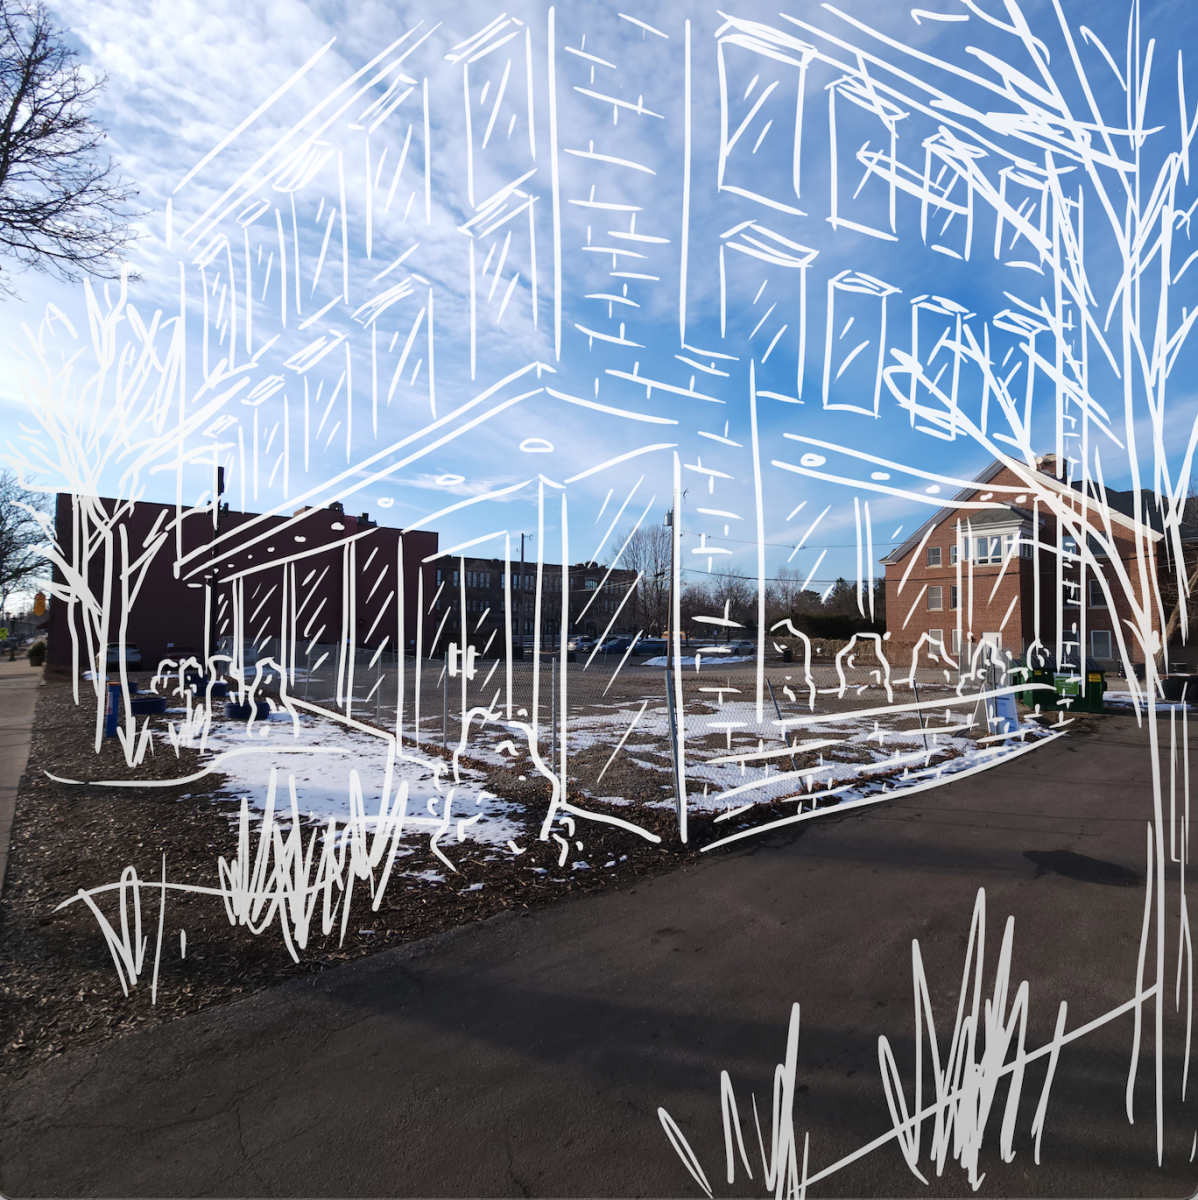 Illustrated location for new residence hall. Photo by Rory Donaghy ’24 and graphic by Zander Leong ’26.